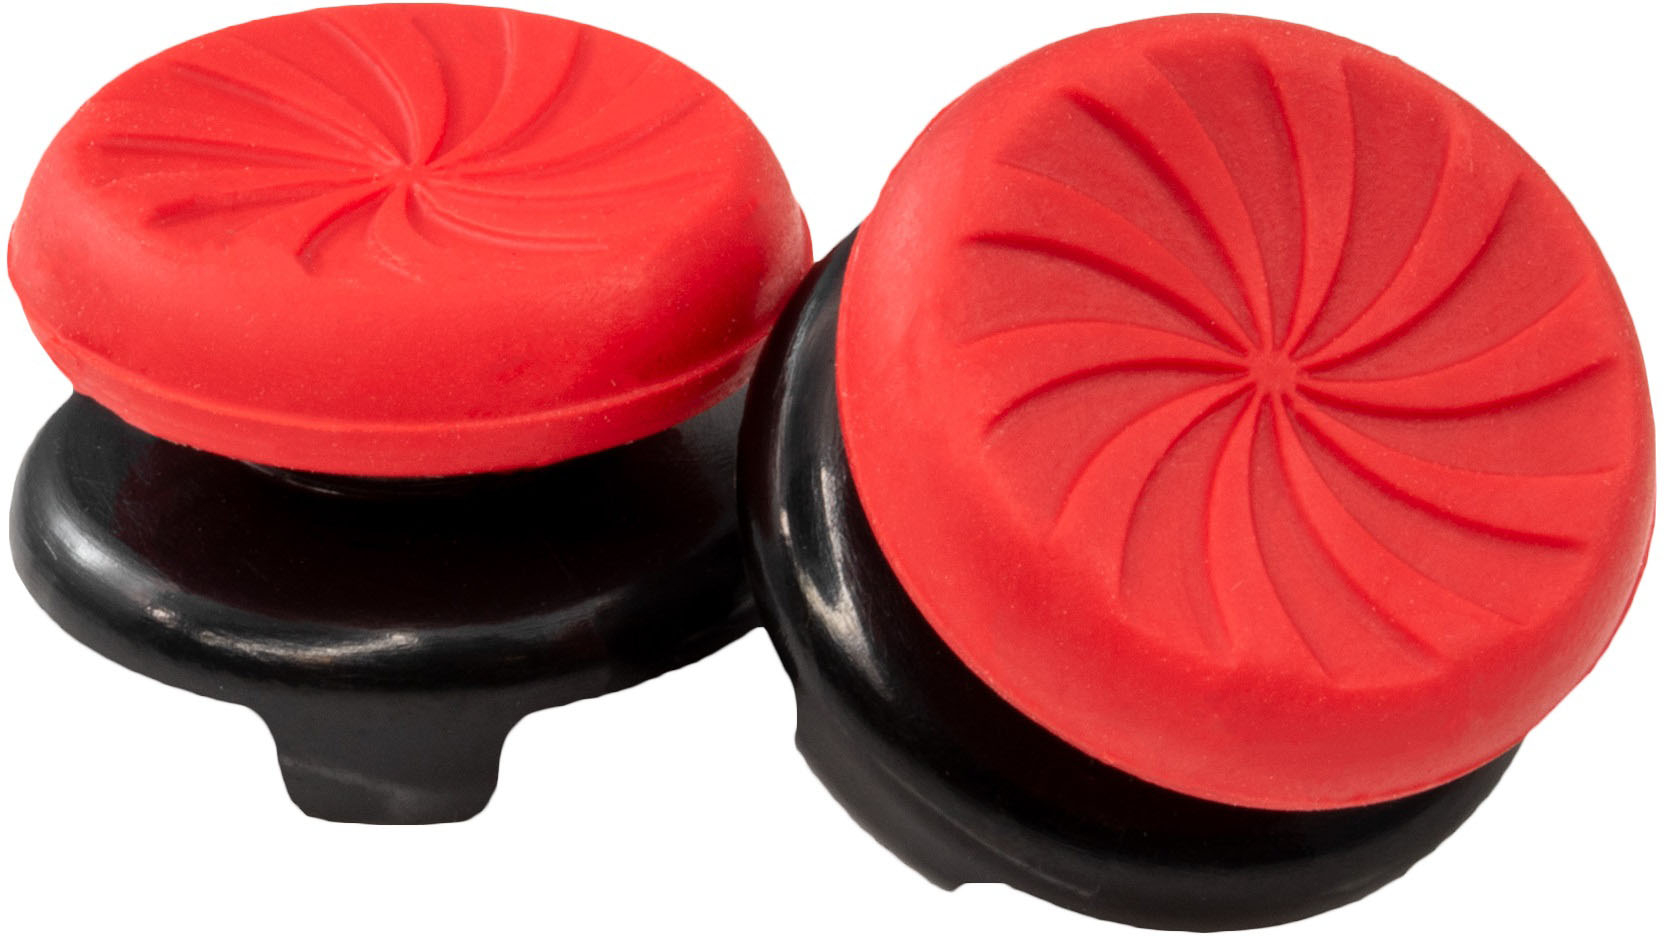 Inferno - Red and FPS for Thumbsticks 4 S 2040-XBX Freek Performance Xbox One KontrolFreek Buy Best Xbox Prong